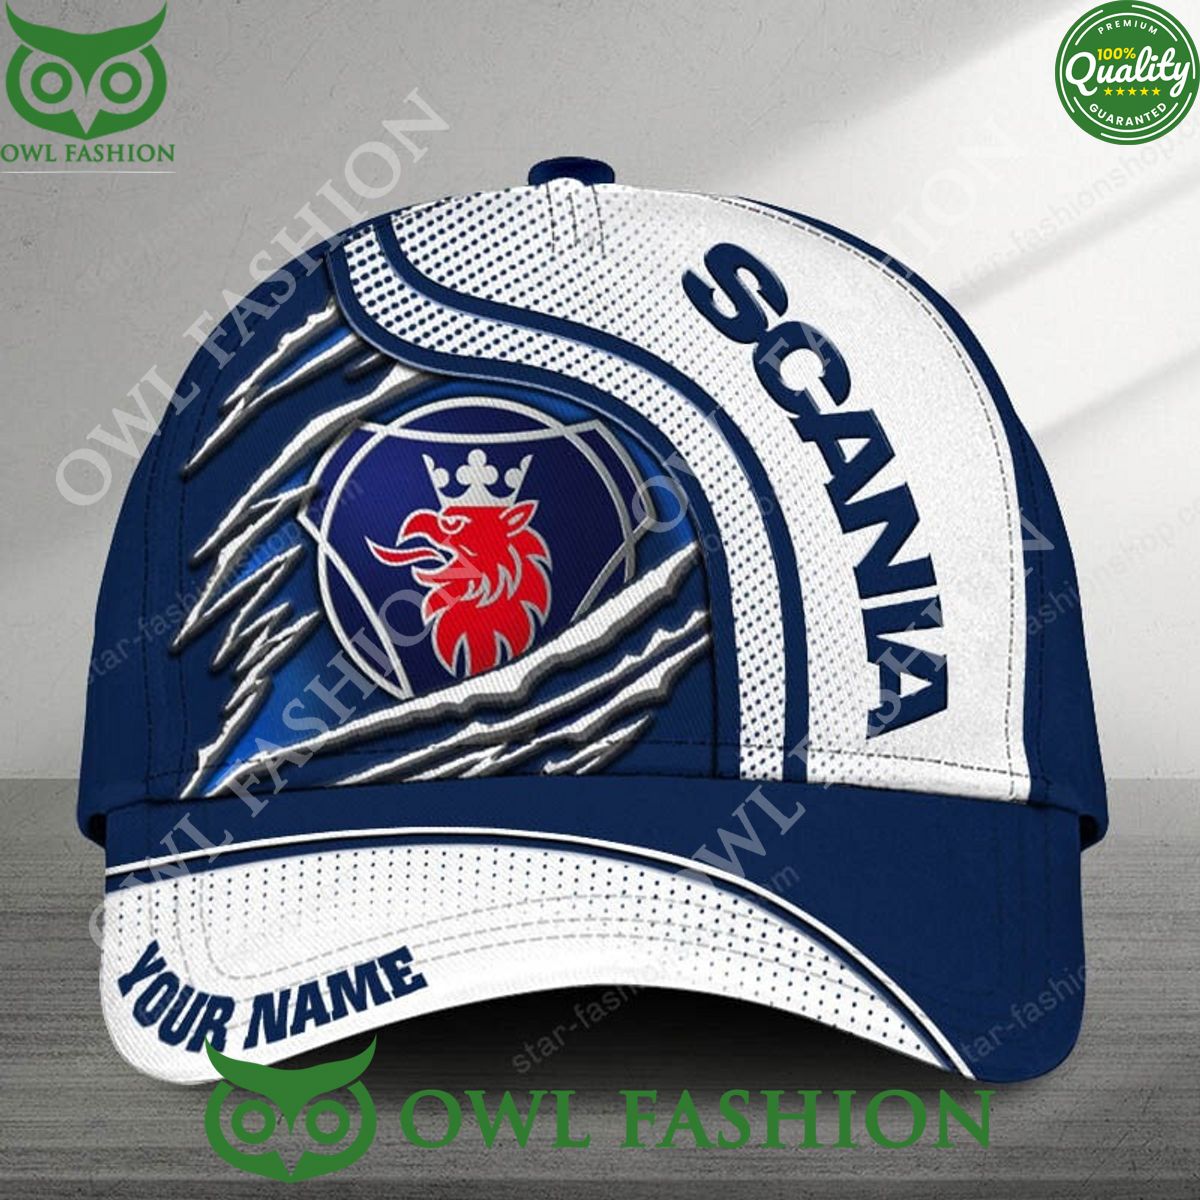 customized scania limited edition car scratches printed cap 1 POdIS.jpg